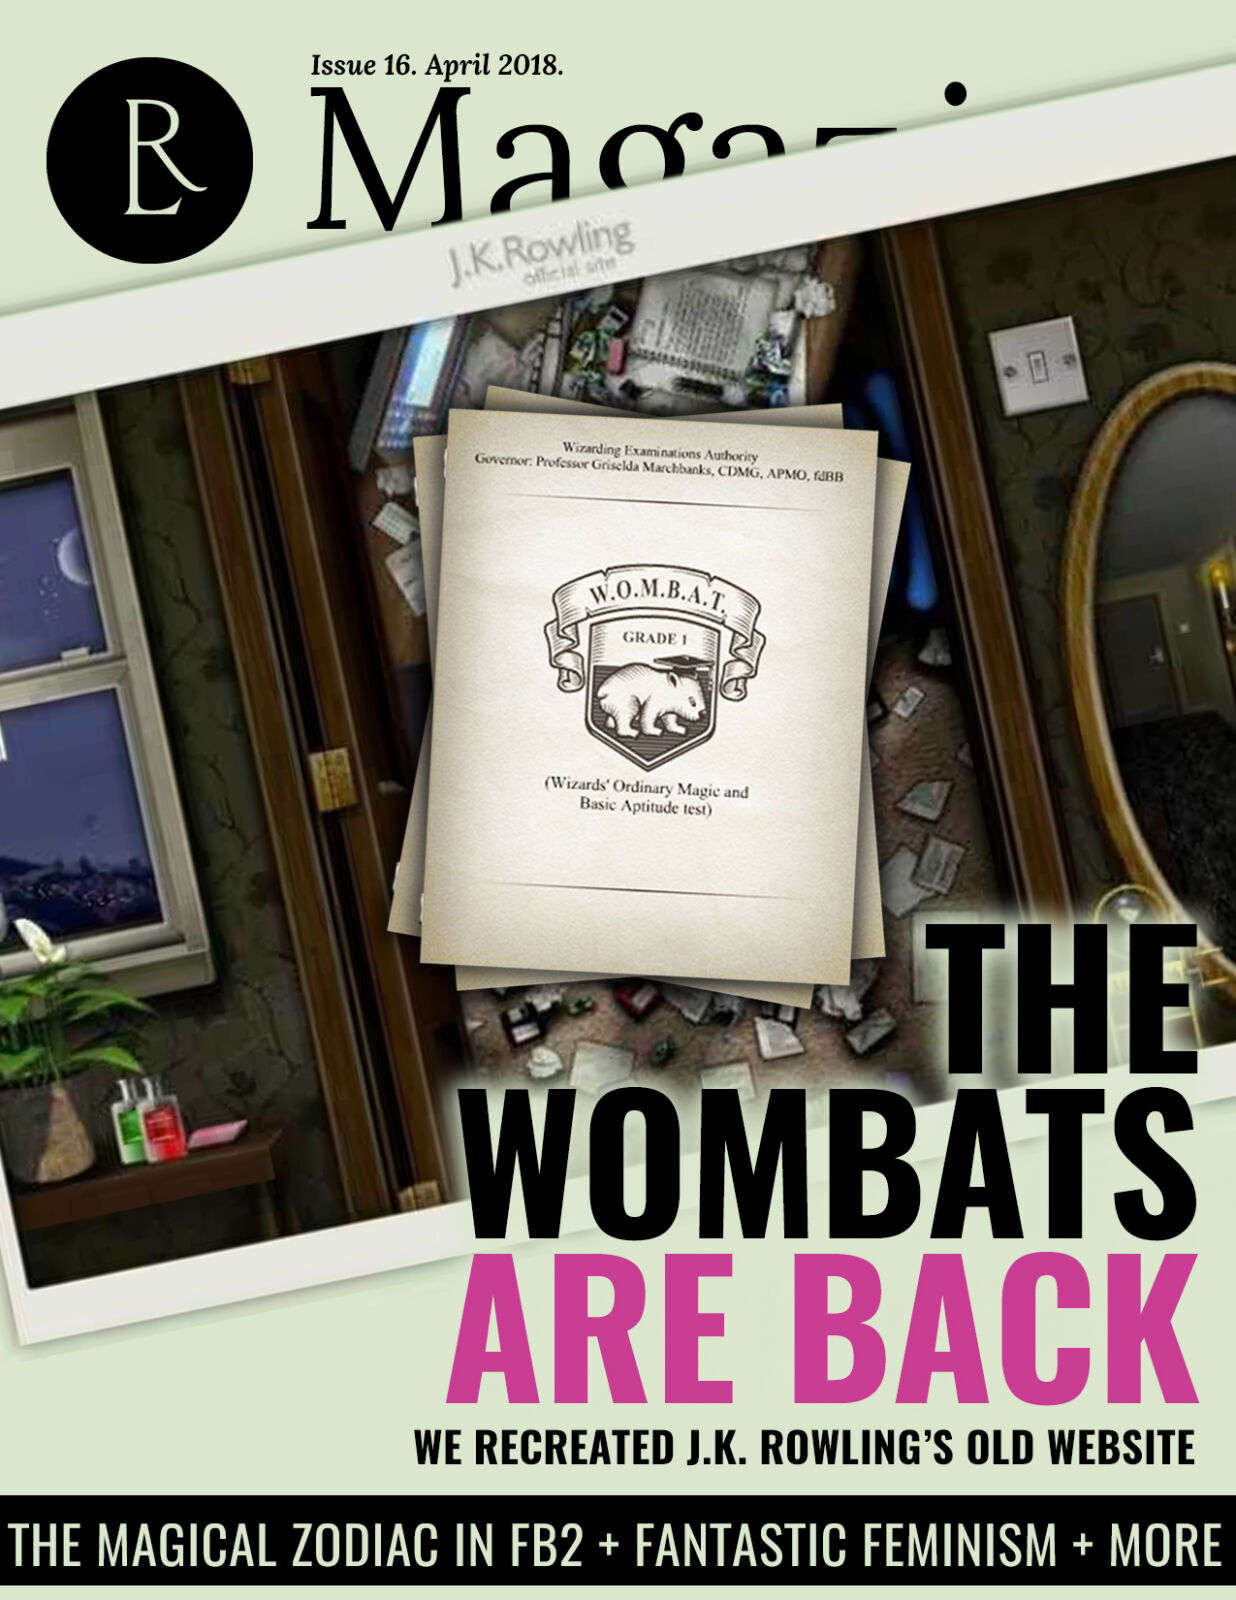 The Rowling Library Magazine #16 (April 2018): The WOMBATs are back